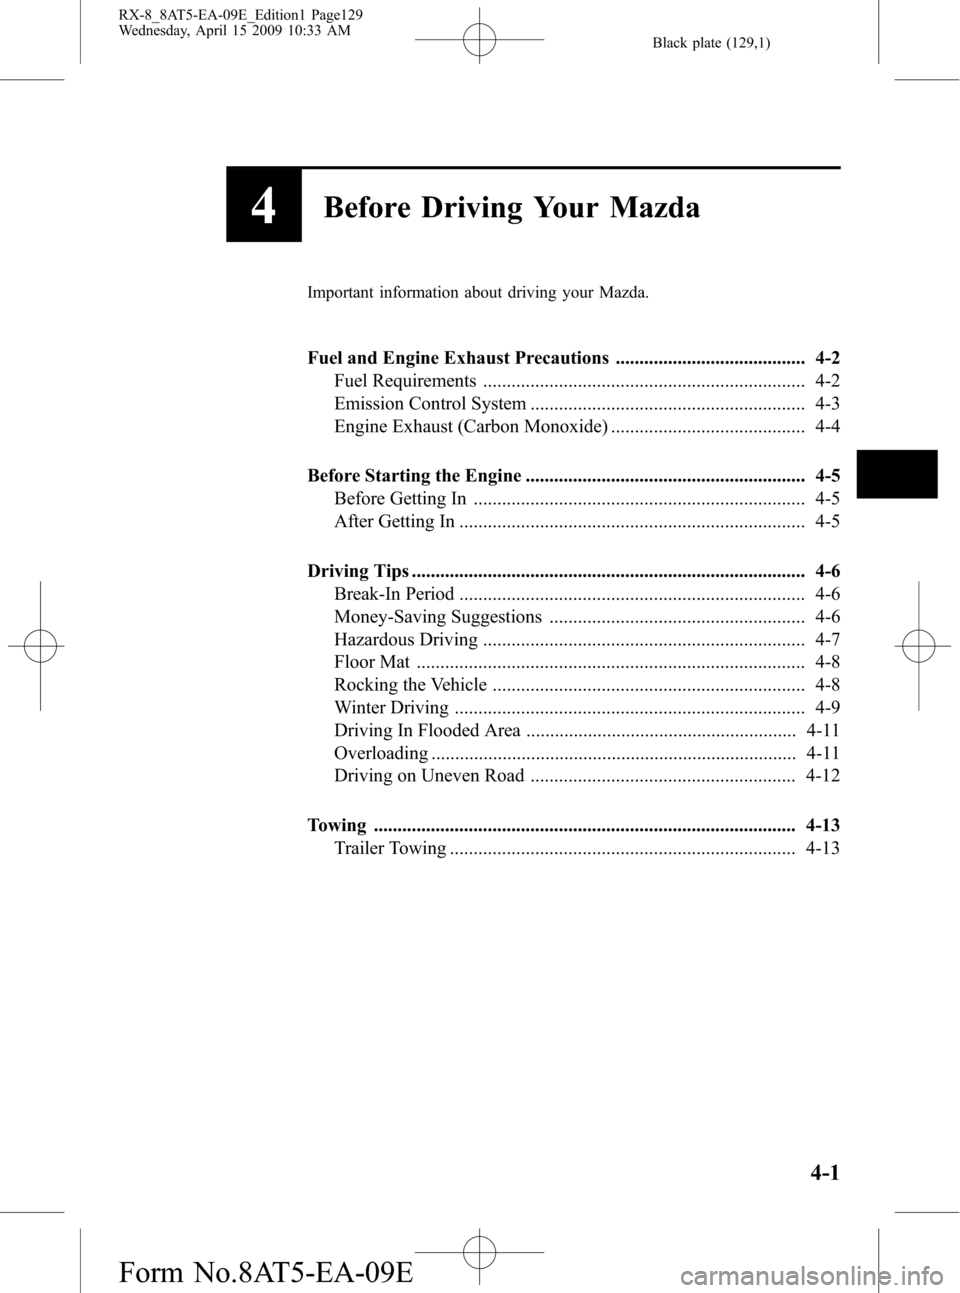 MAZDA MODEL RX 8 2010  Owners Manual (in English) Black plate (129,1)
4Before Driving Your Mazda
Important information about driving your Mazda.
Fuel and Engine Exhaust Precautions ........................................ 4-2
Fuel Requirements ......